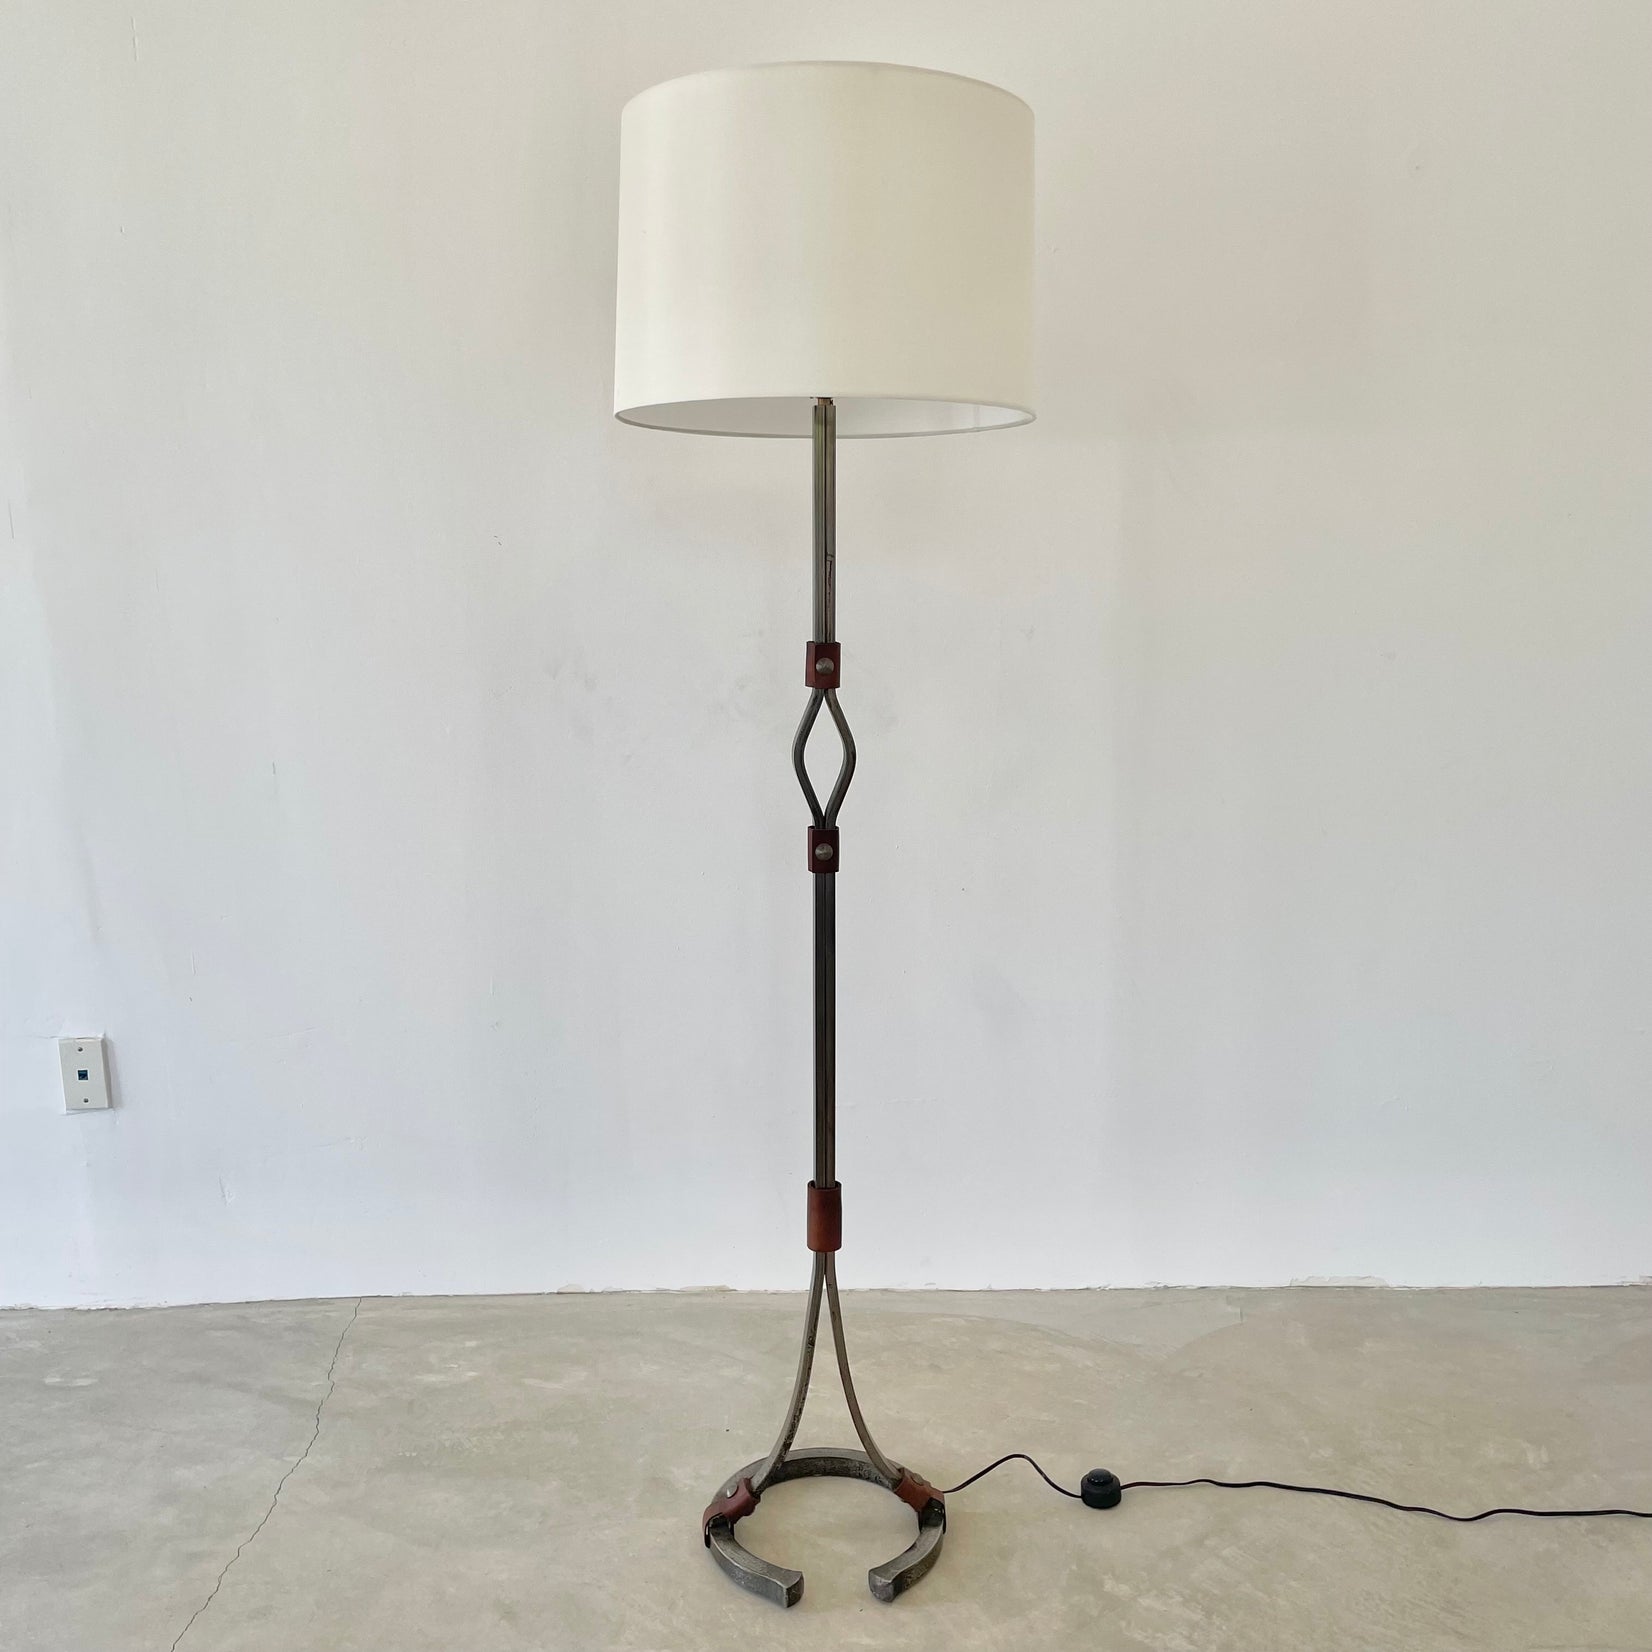 Jacques Adnet Steel and Leather Floor Lamp, 1950s France